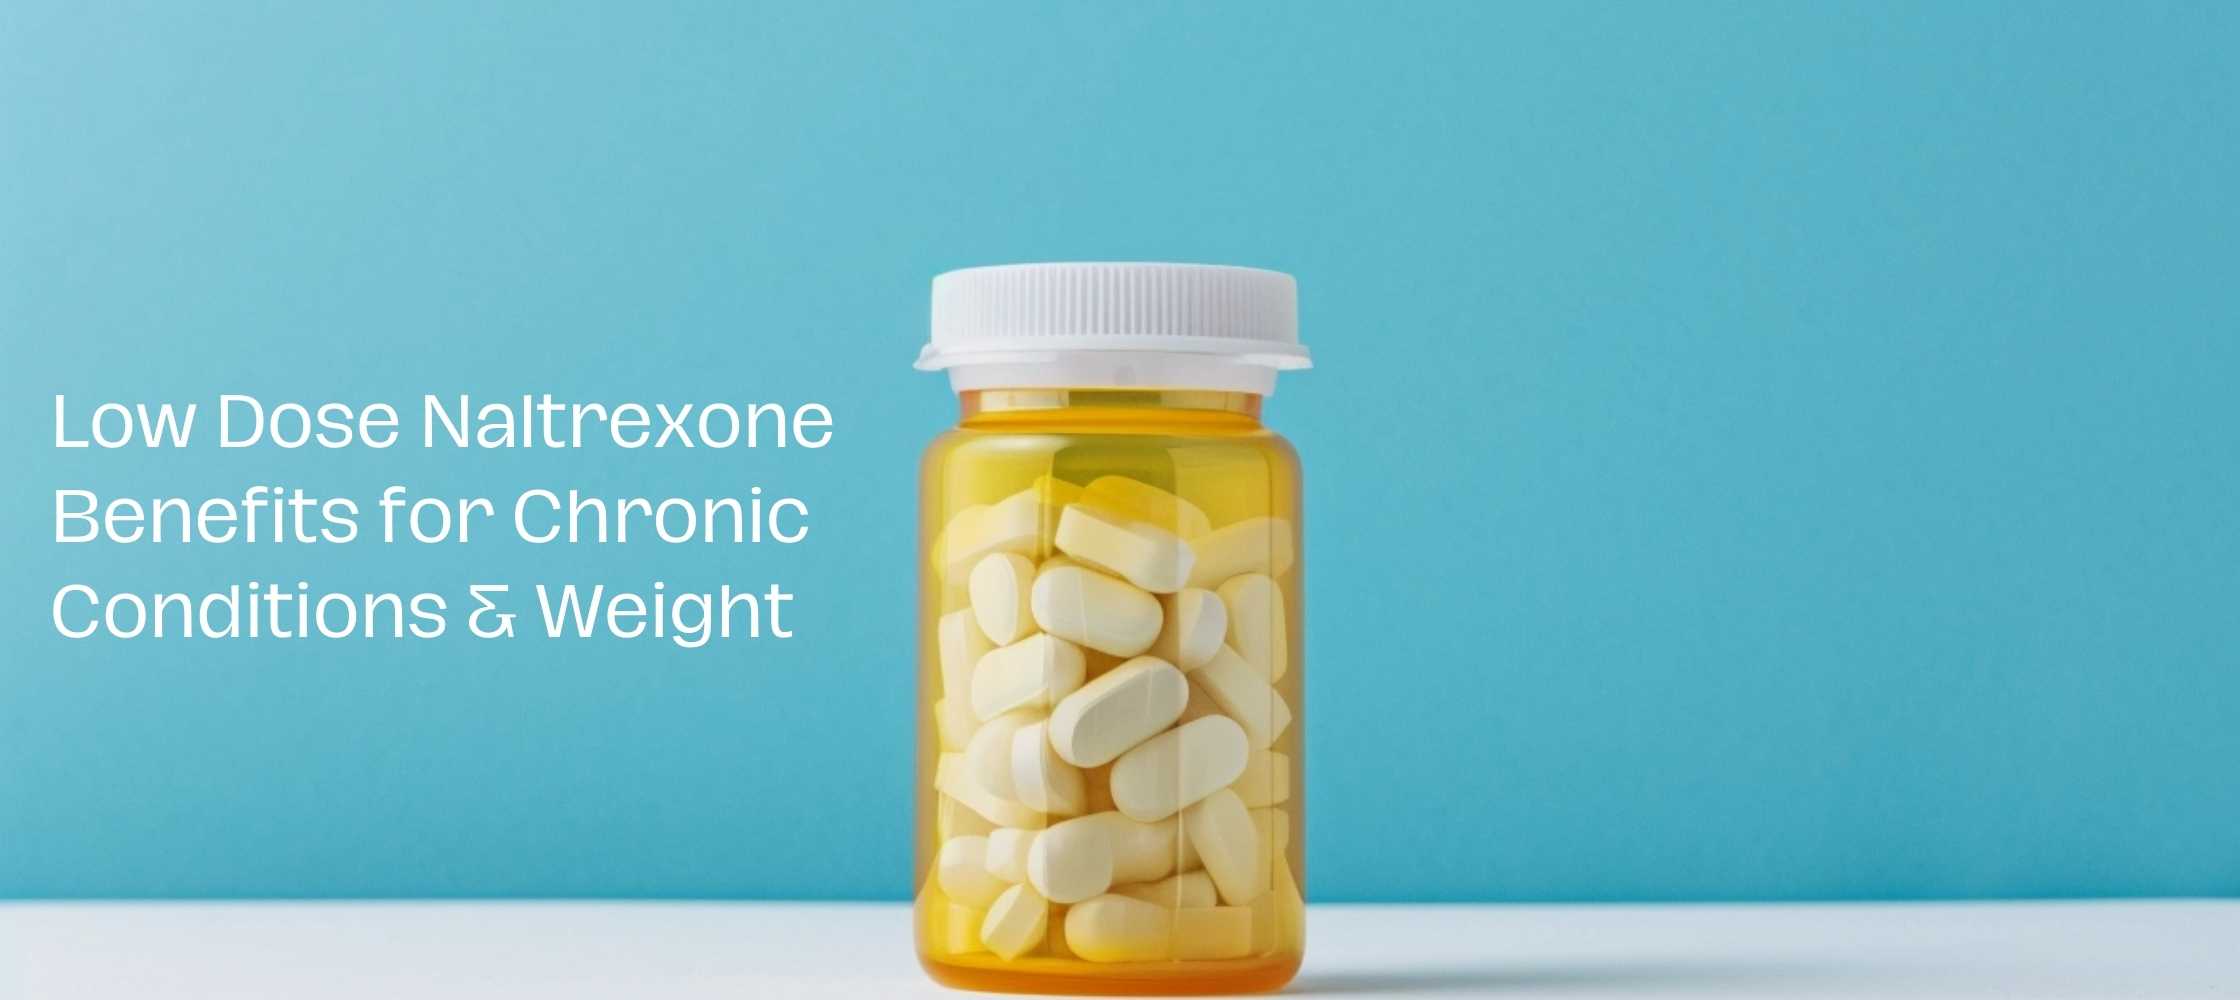 Low Dose Naltrexone Benefits for Chronic Conditions & Weight